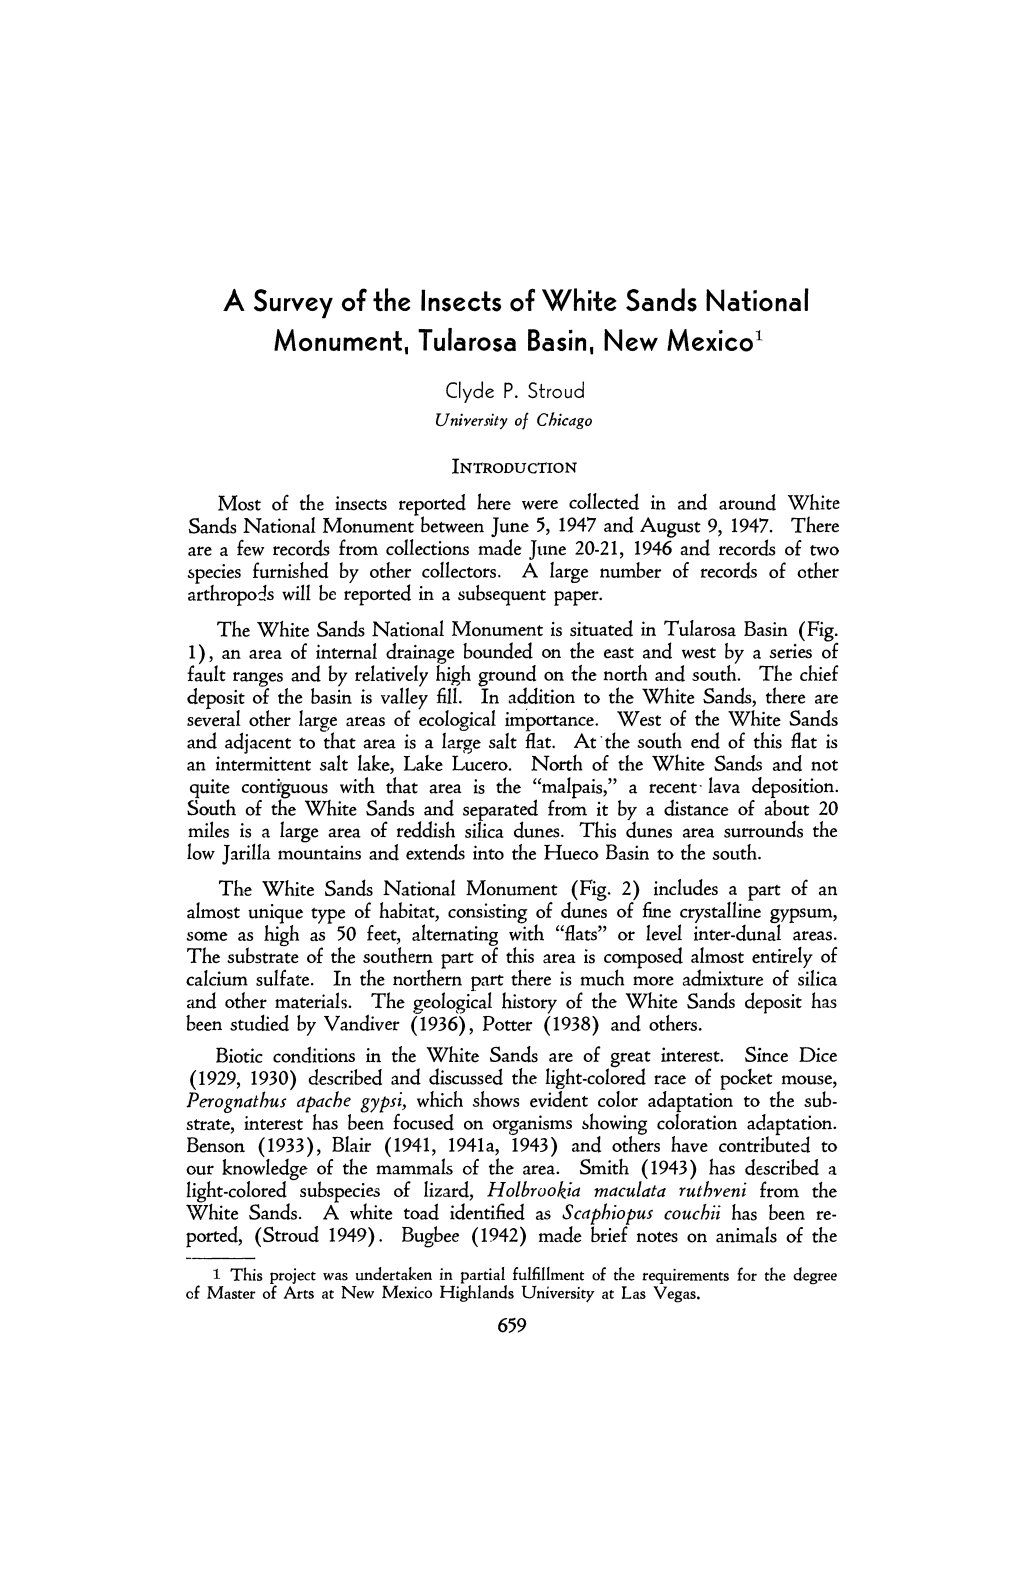 A Survey of the Insects of White Sands National Monument, Tularosa